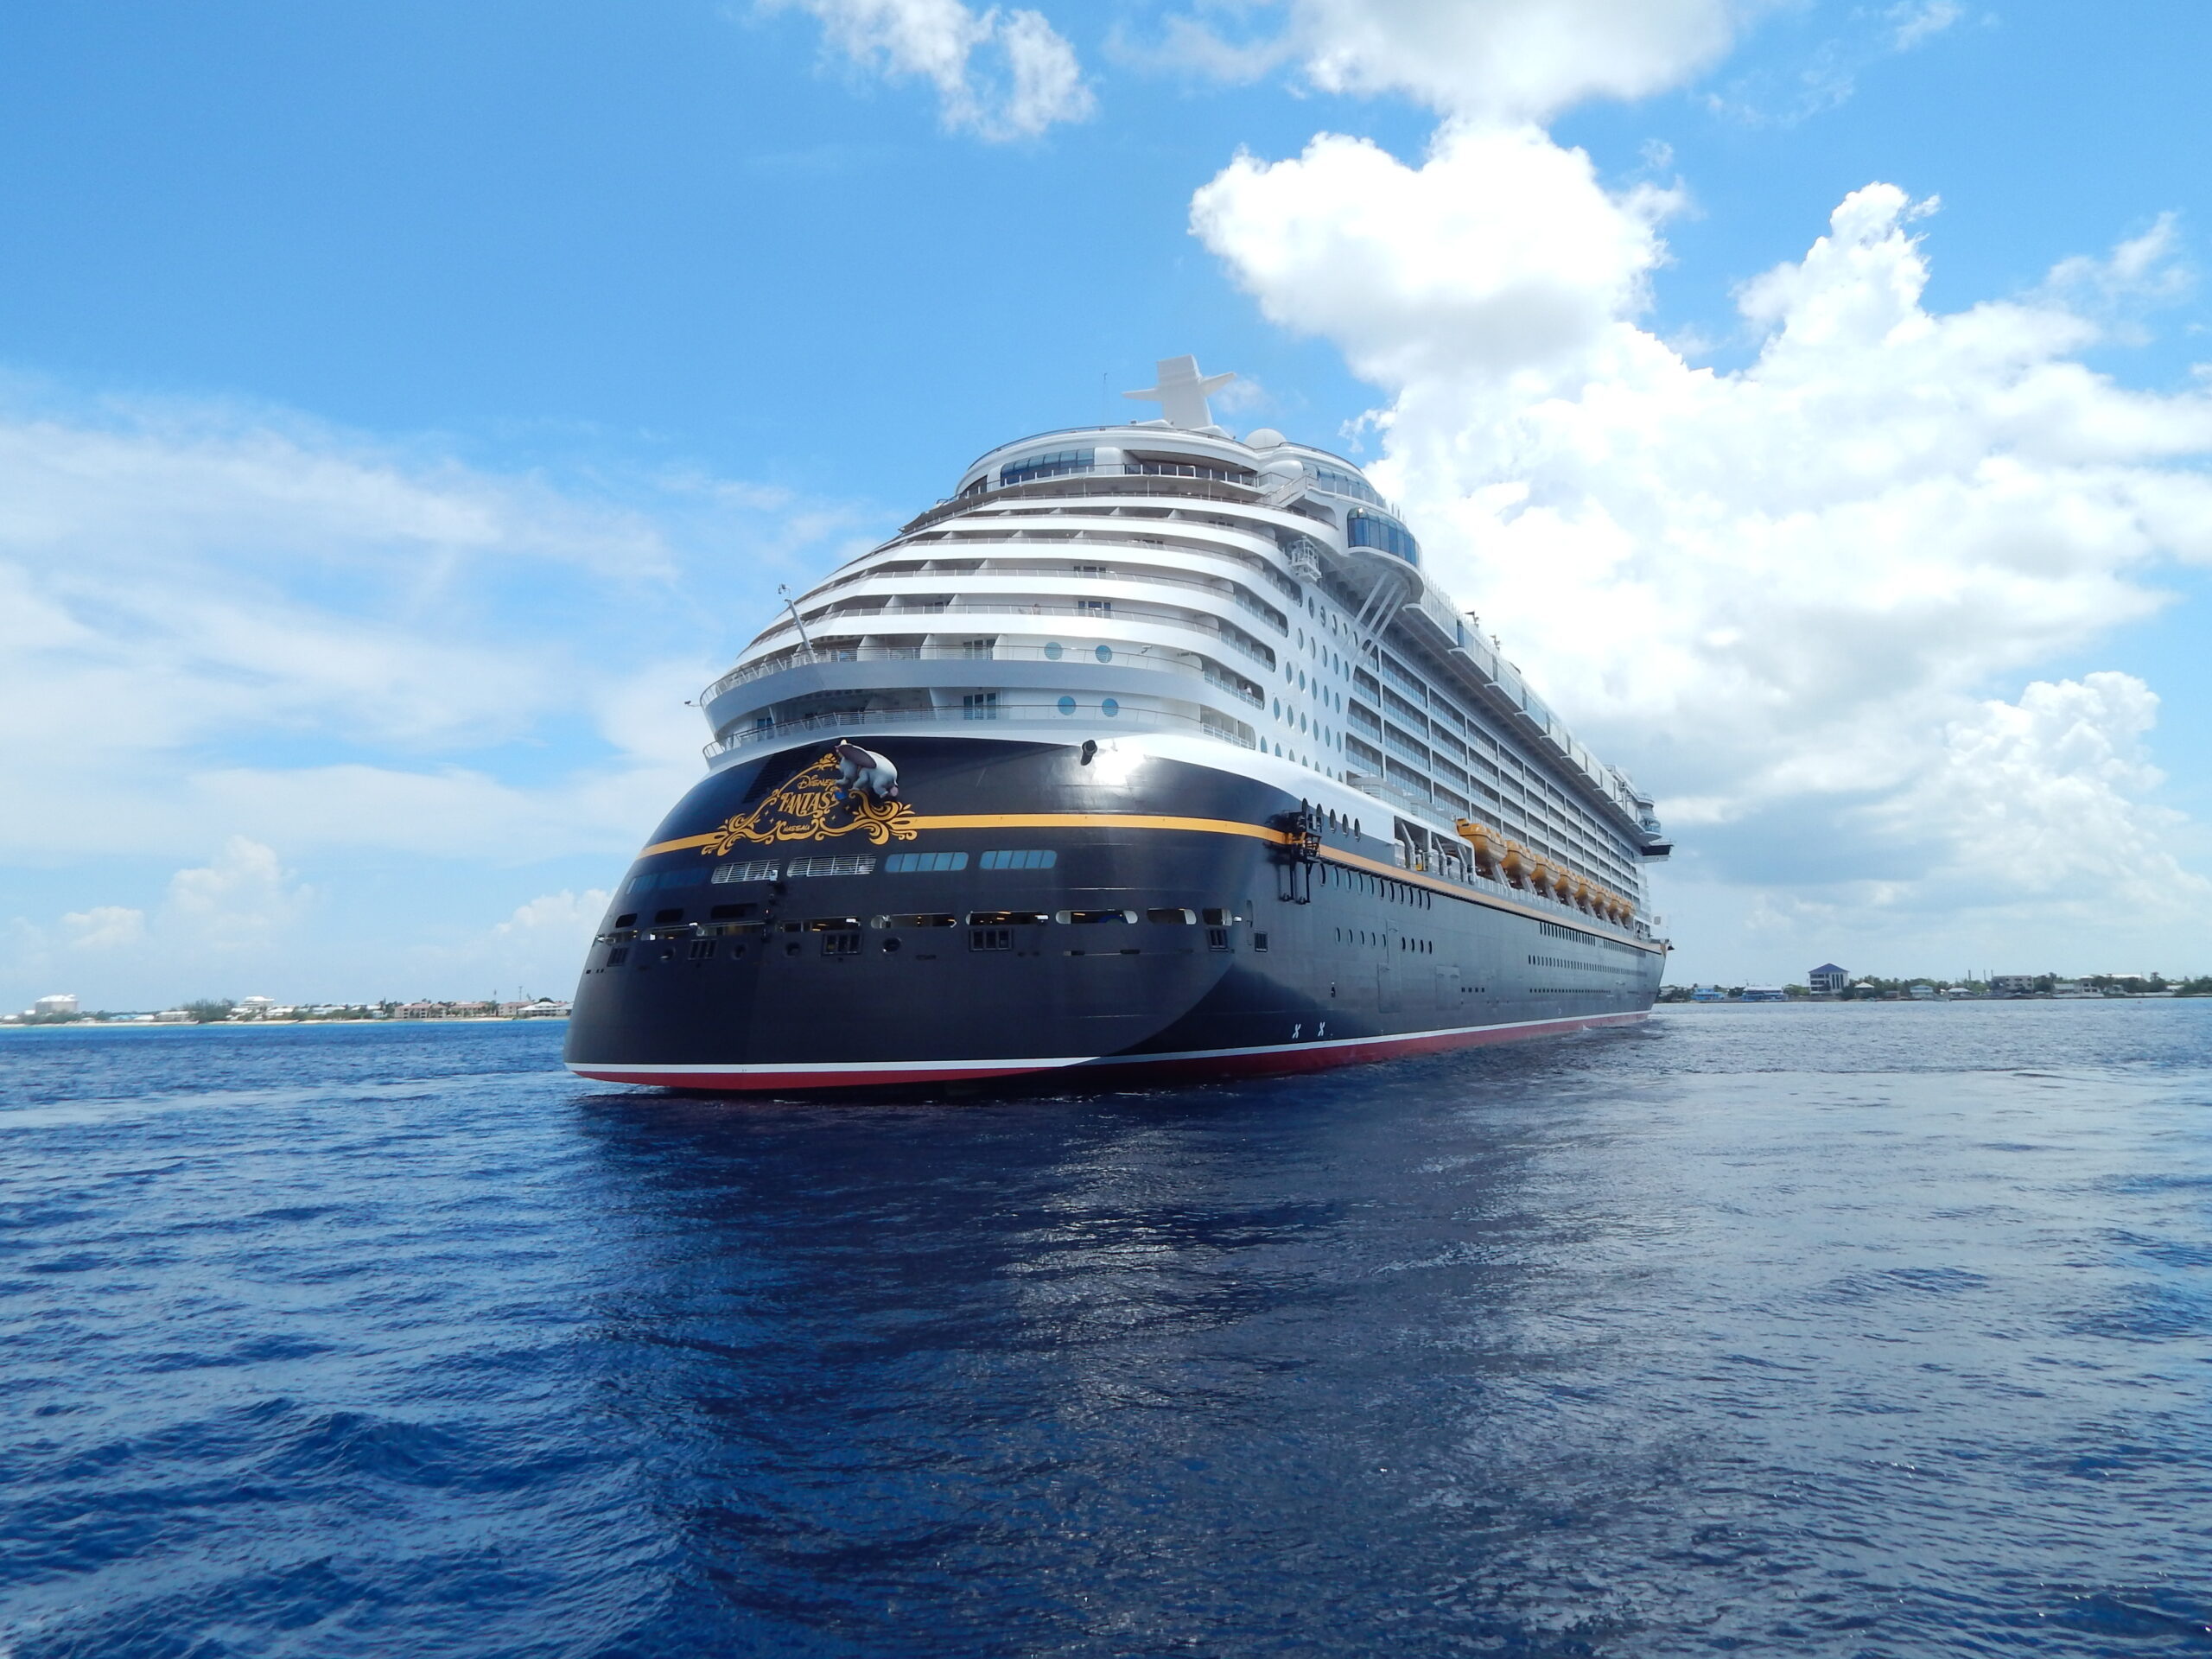 Disney cruise ship sitting in water with a beautiful blue sky and clouds